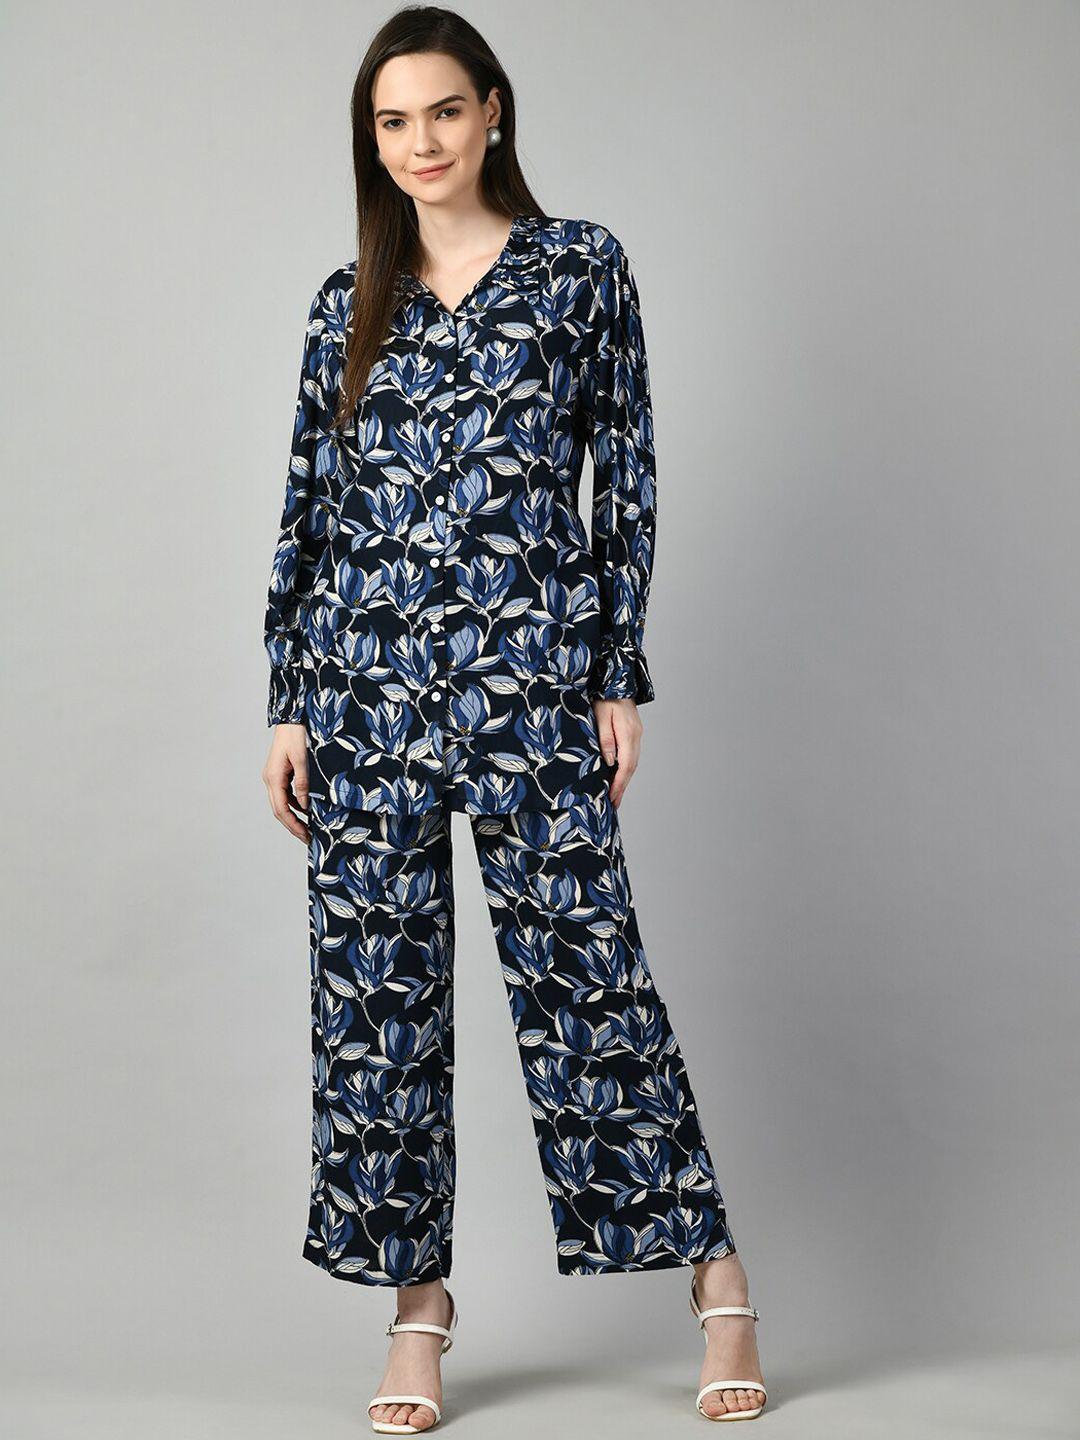 doisa floral printed shirt and trouser